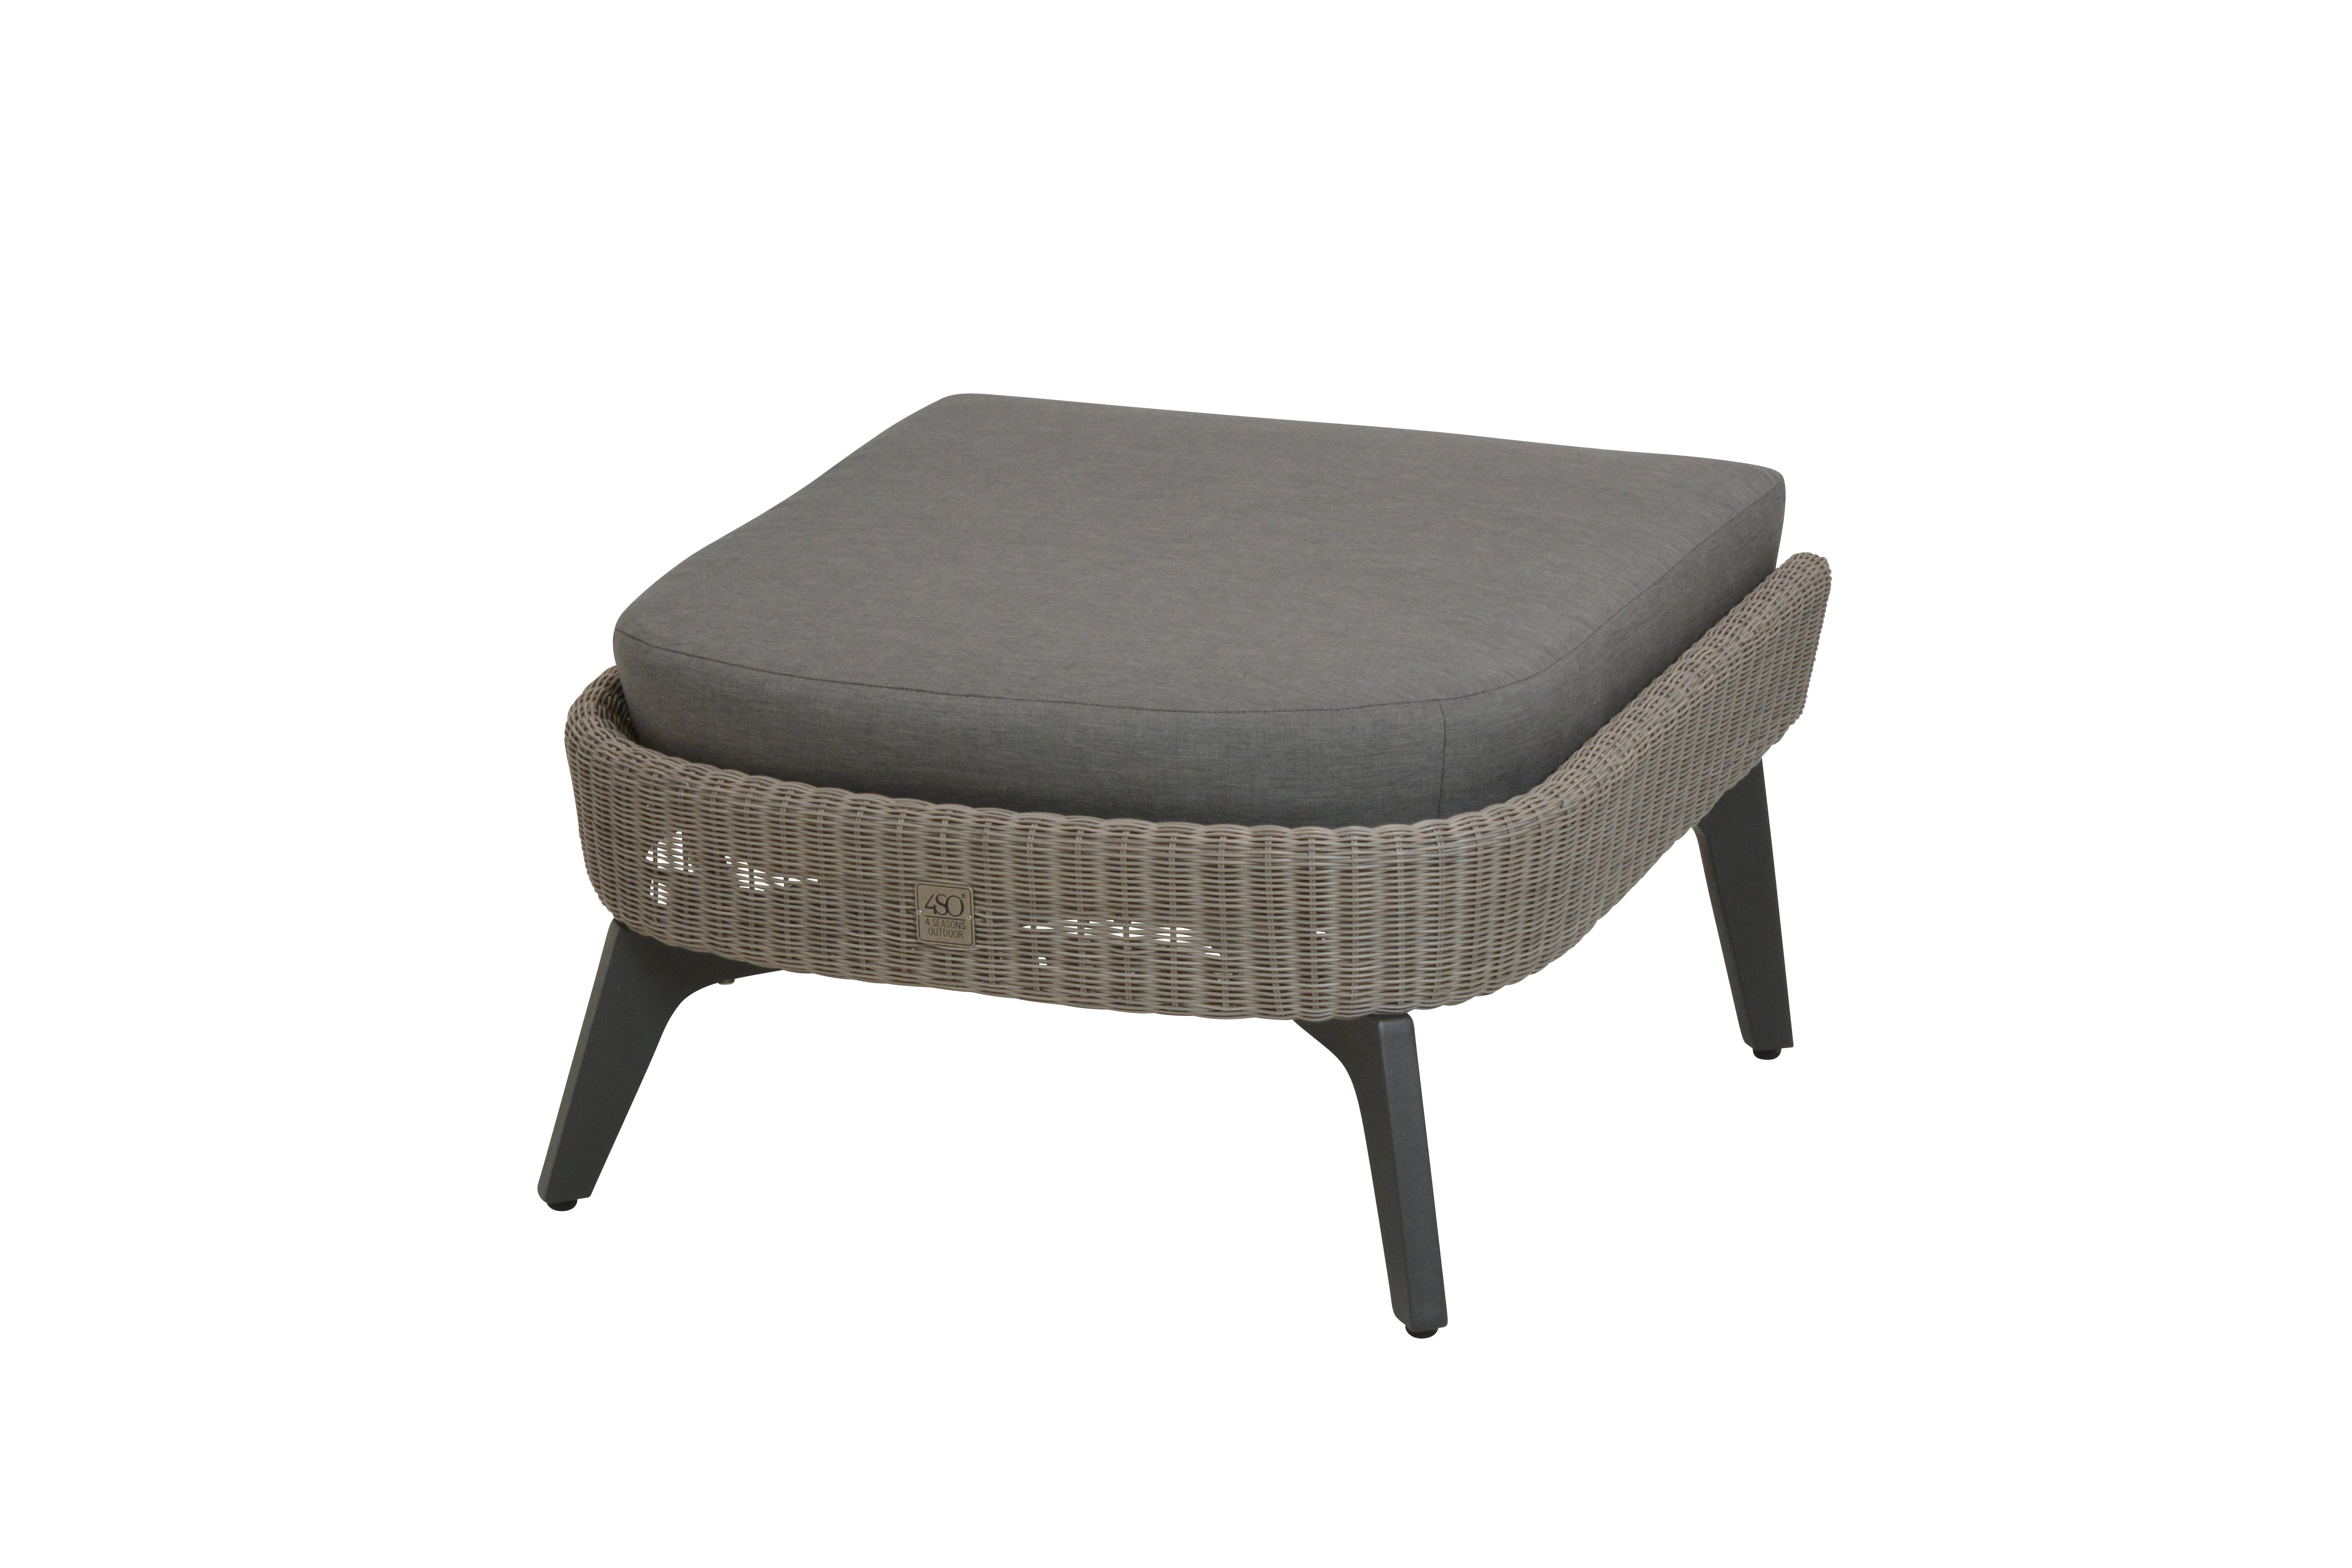 4 Seasons Outdoor Luxor Footstool With Cushion